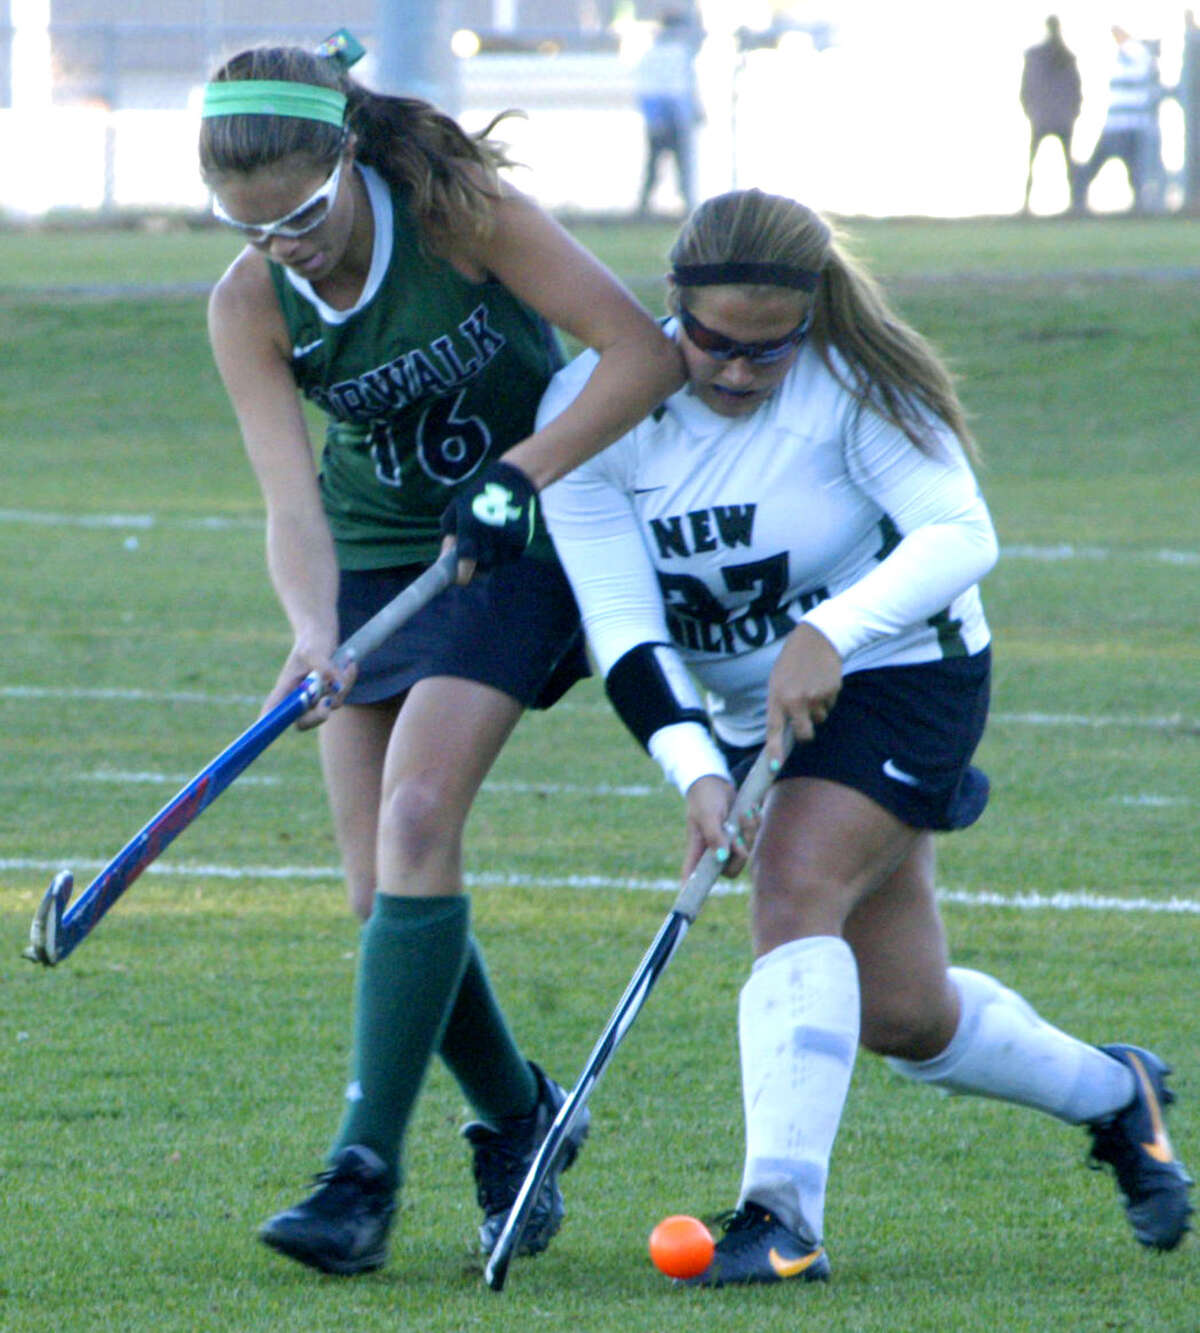 The Green Wave's Lindsey Heaton shrugs off a shot to the face to maintain possession during New Milford High School field hockey's 1-0 victory over Norwalk in the playdown round of the state class 'L' tournament at NMHS. Nov. 4, 2013